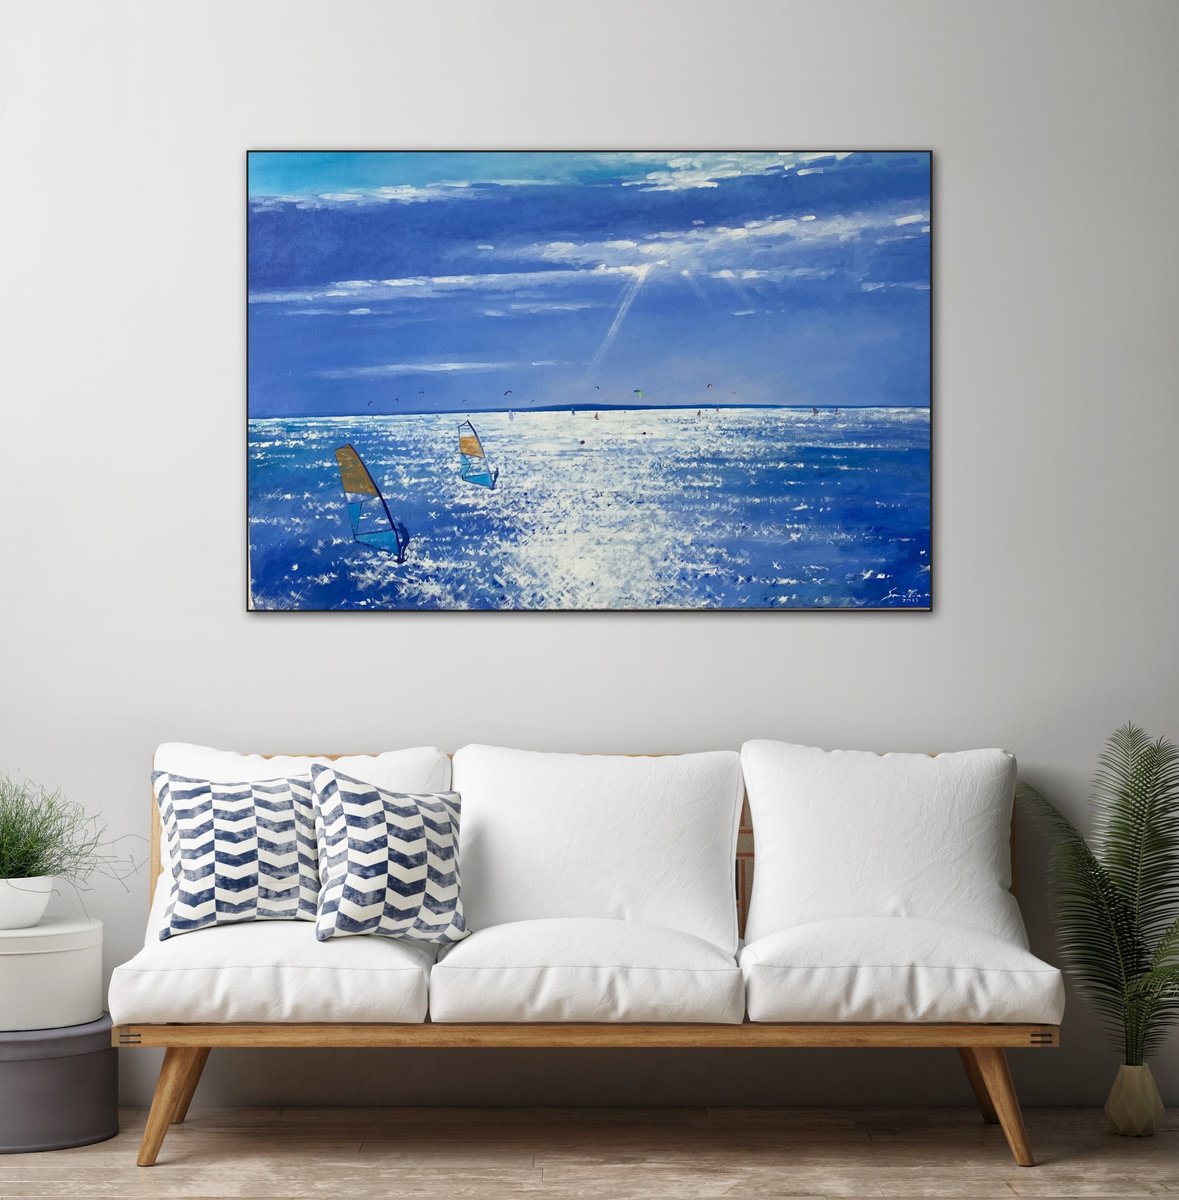 seacape painting on canvas , reflection on water art, sailboat art by Volodymyr Smoliak